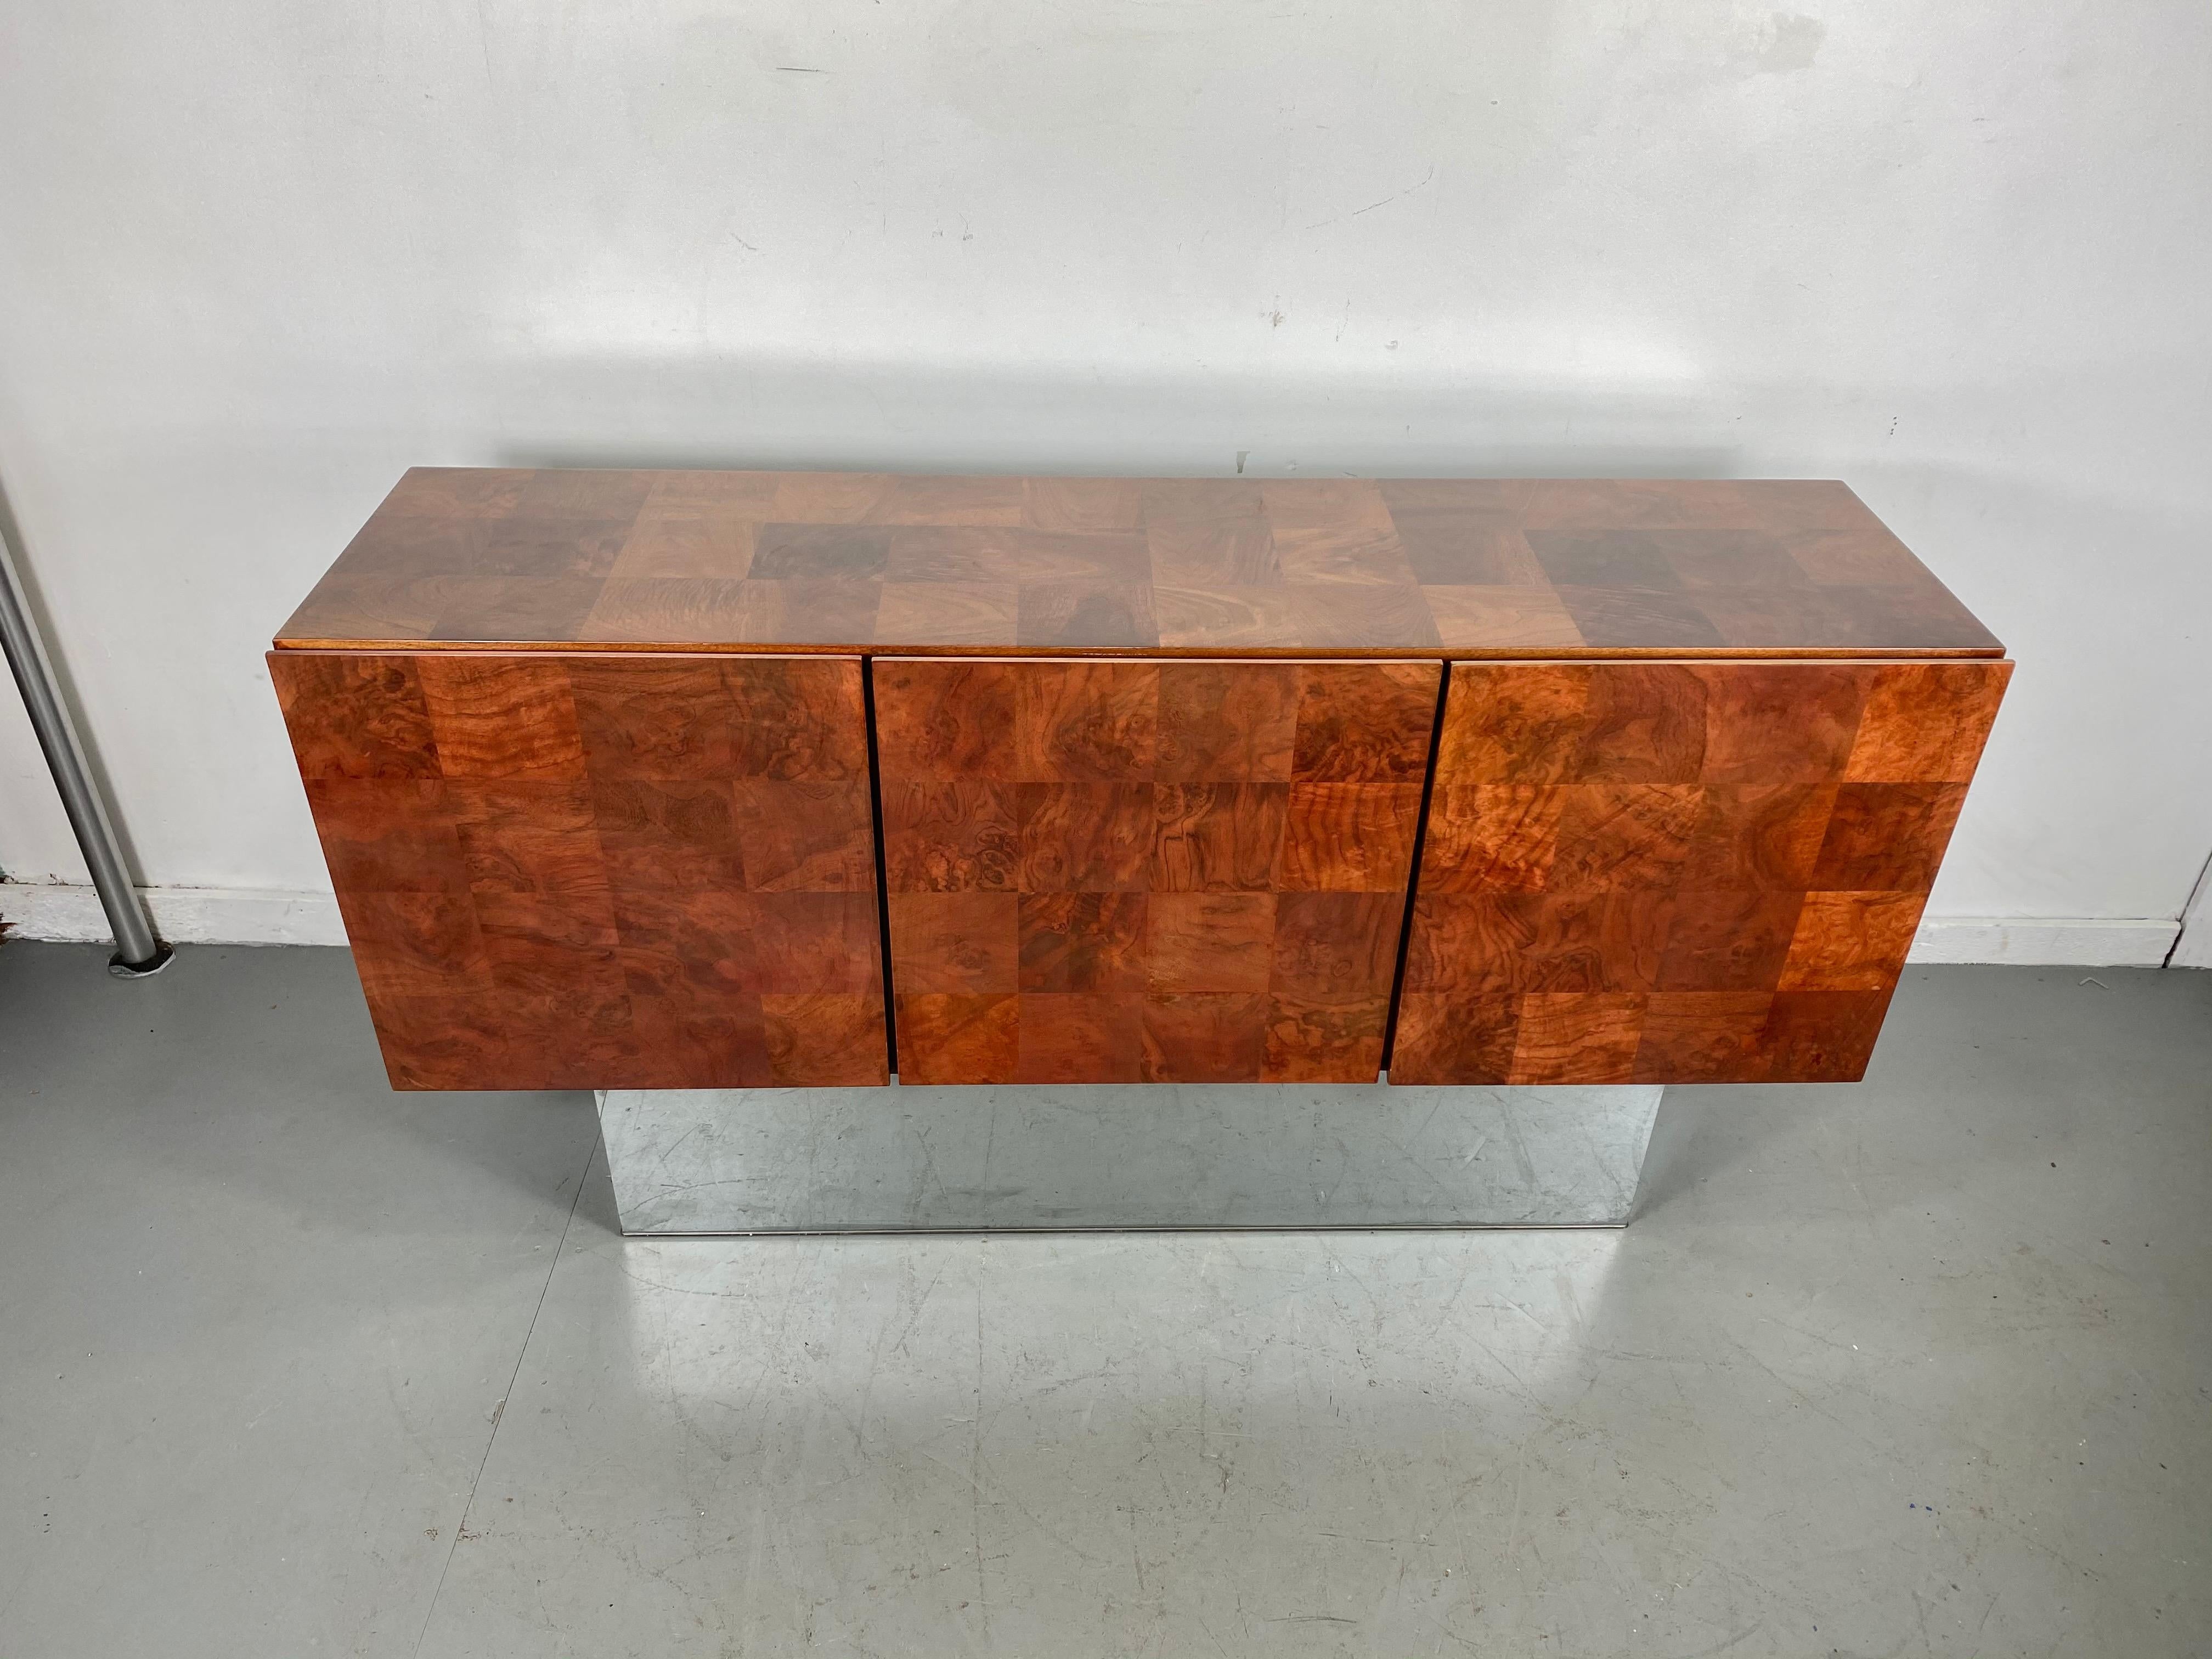 Gorgeous Milo Baughman tall burled patchwork walnut and chrome credenza. This piece retains its original finish and still looks amazing tall chrome plinth base has some minor dings hardly noticeable, two doors with shelf, left door with four white